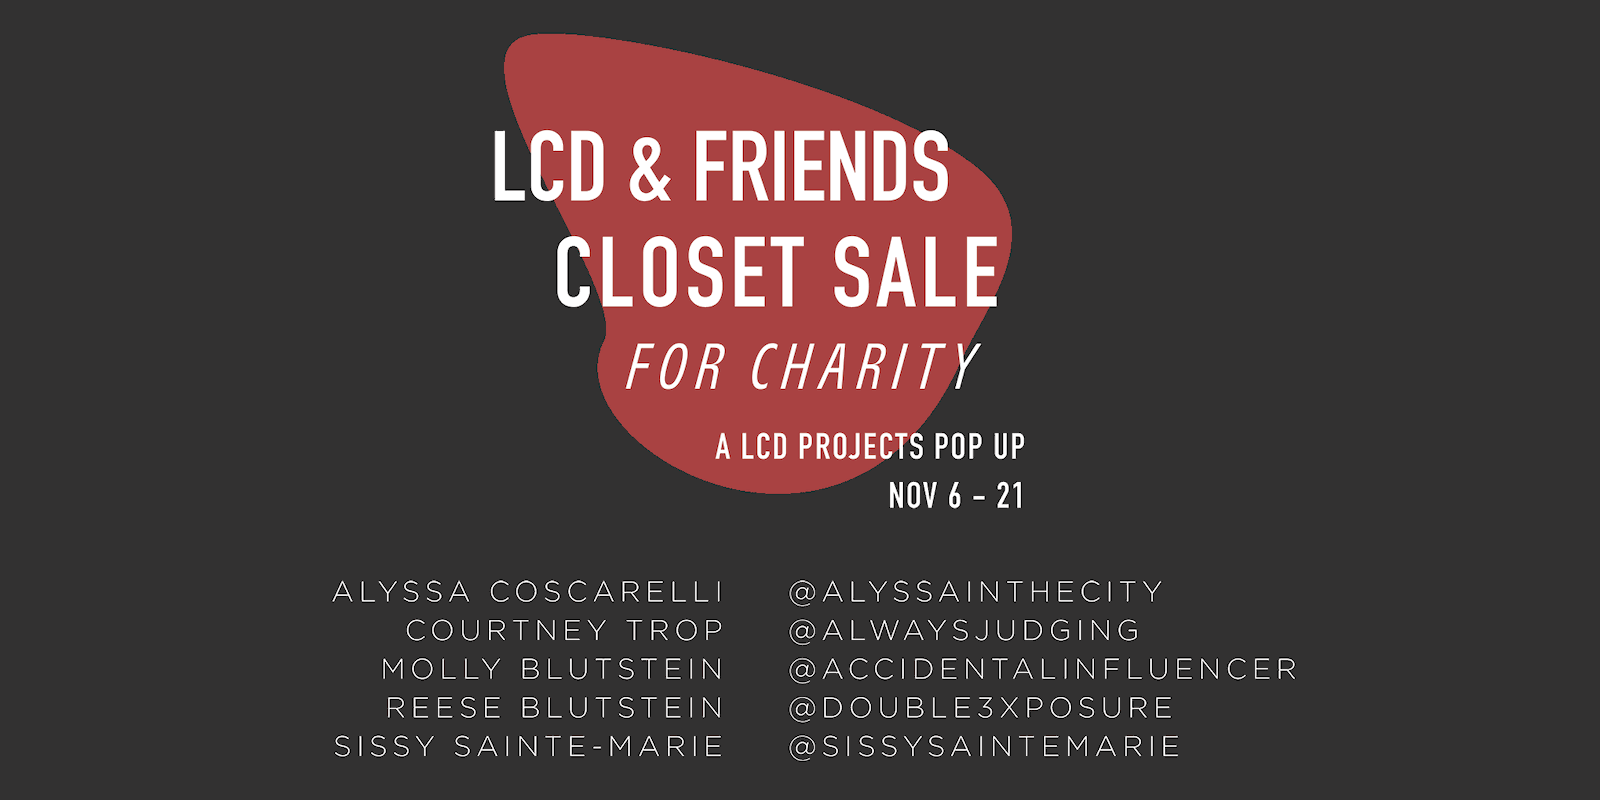 LCD & Friends Closet Sale for Charity